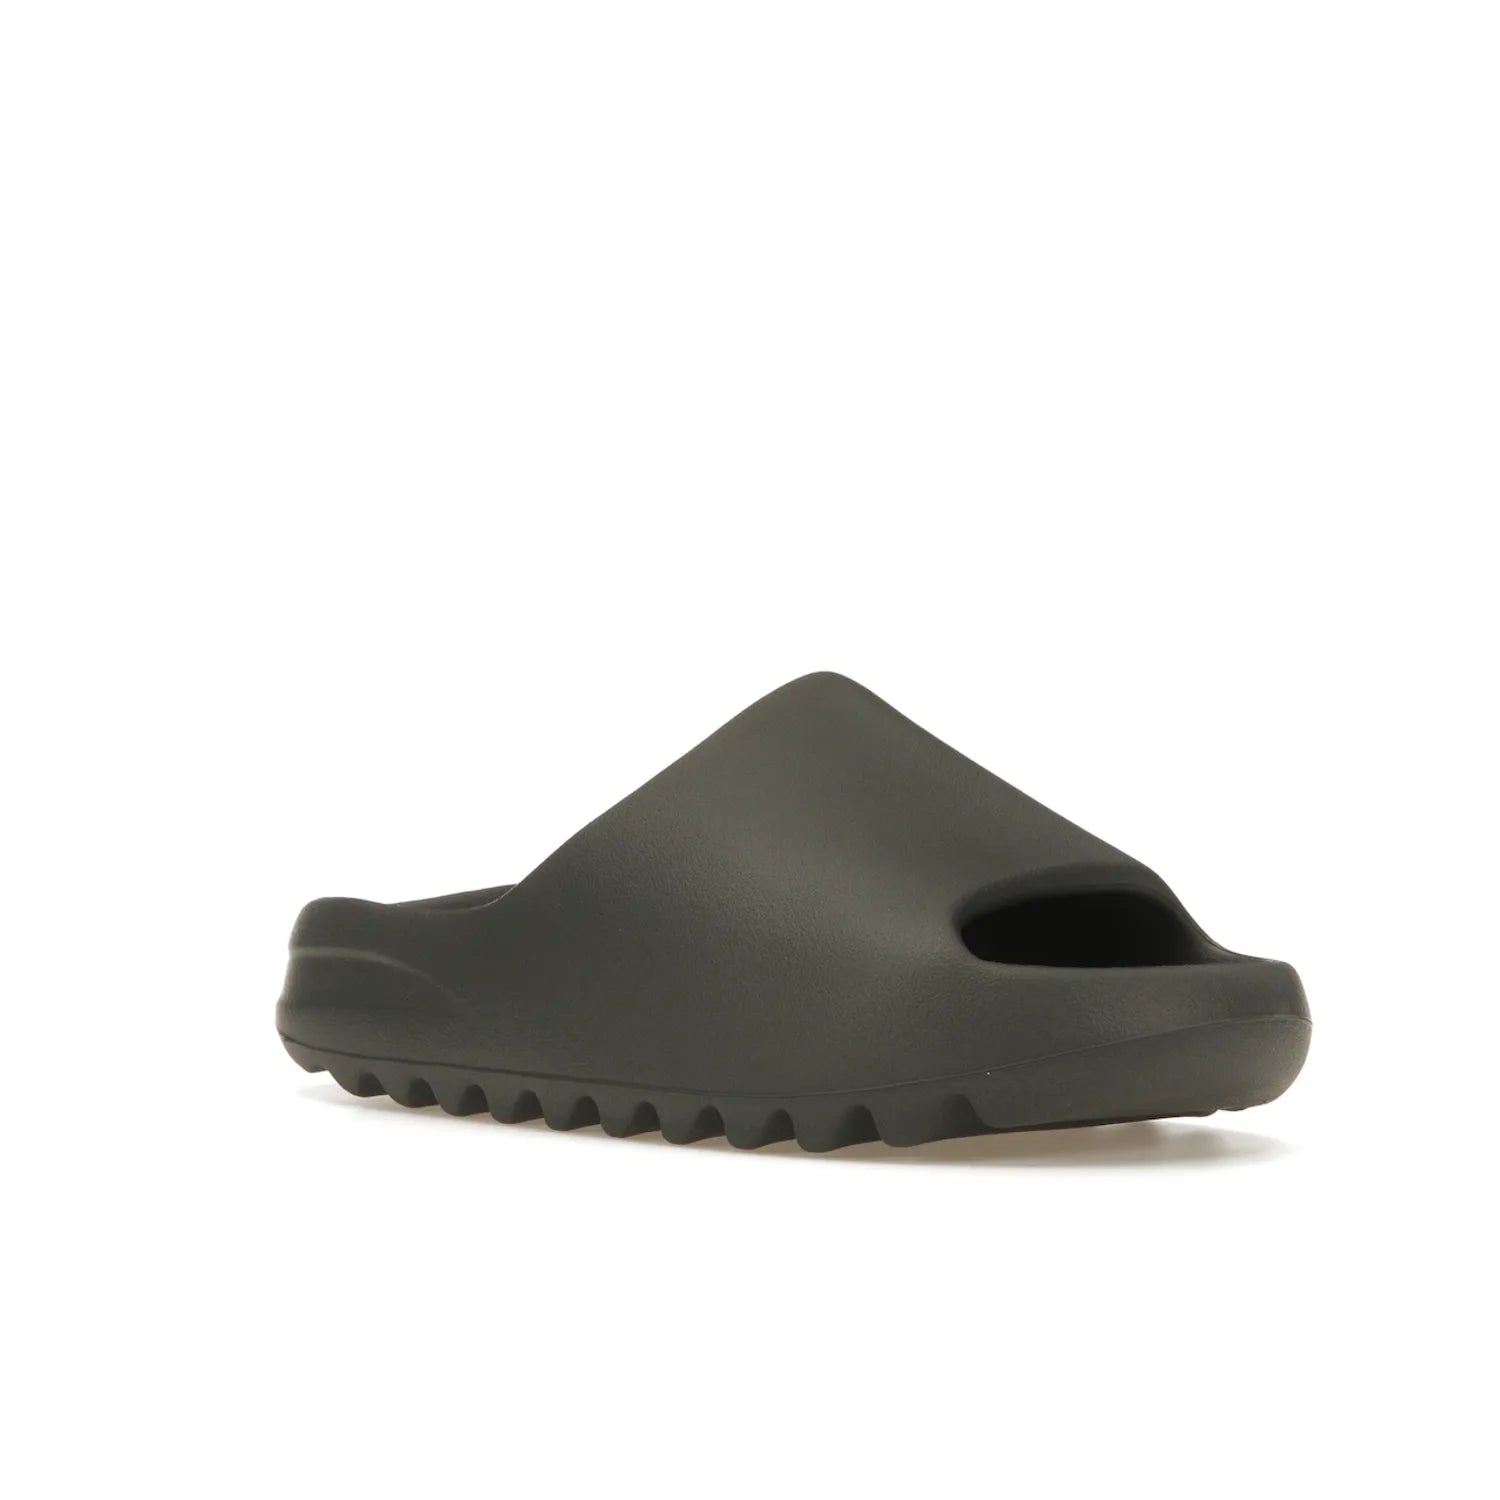 adidas Yeezy Slide Granite - Image 5 - Only at www.BallersClubKickz.com - Introducing the adidas Yeezy Slide Granite with a sleek, soft-to-touch one-piece upper – perfect for making a statement with its minimalistic design and luxurious comfort. Get yours now for only $70.